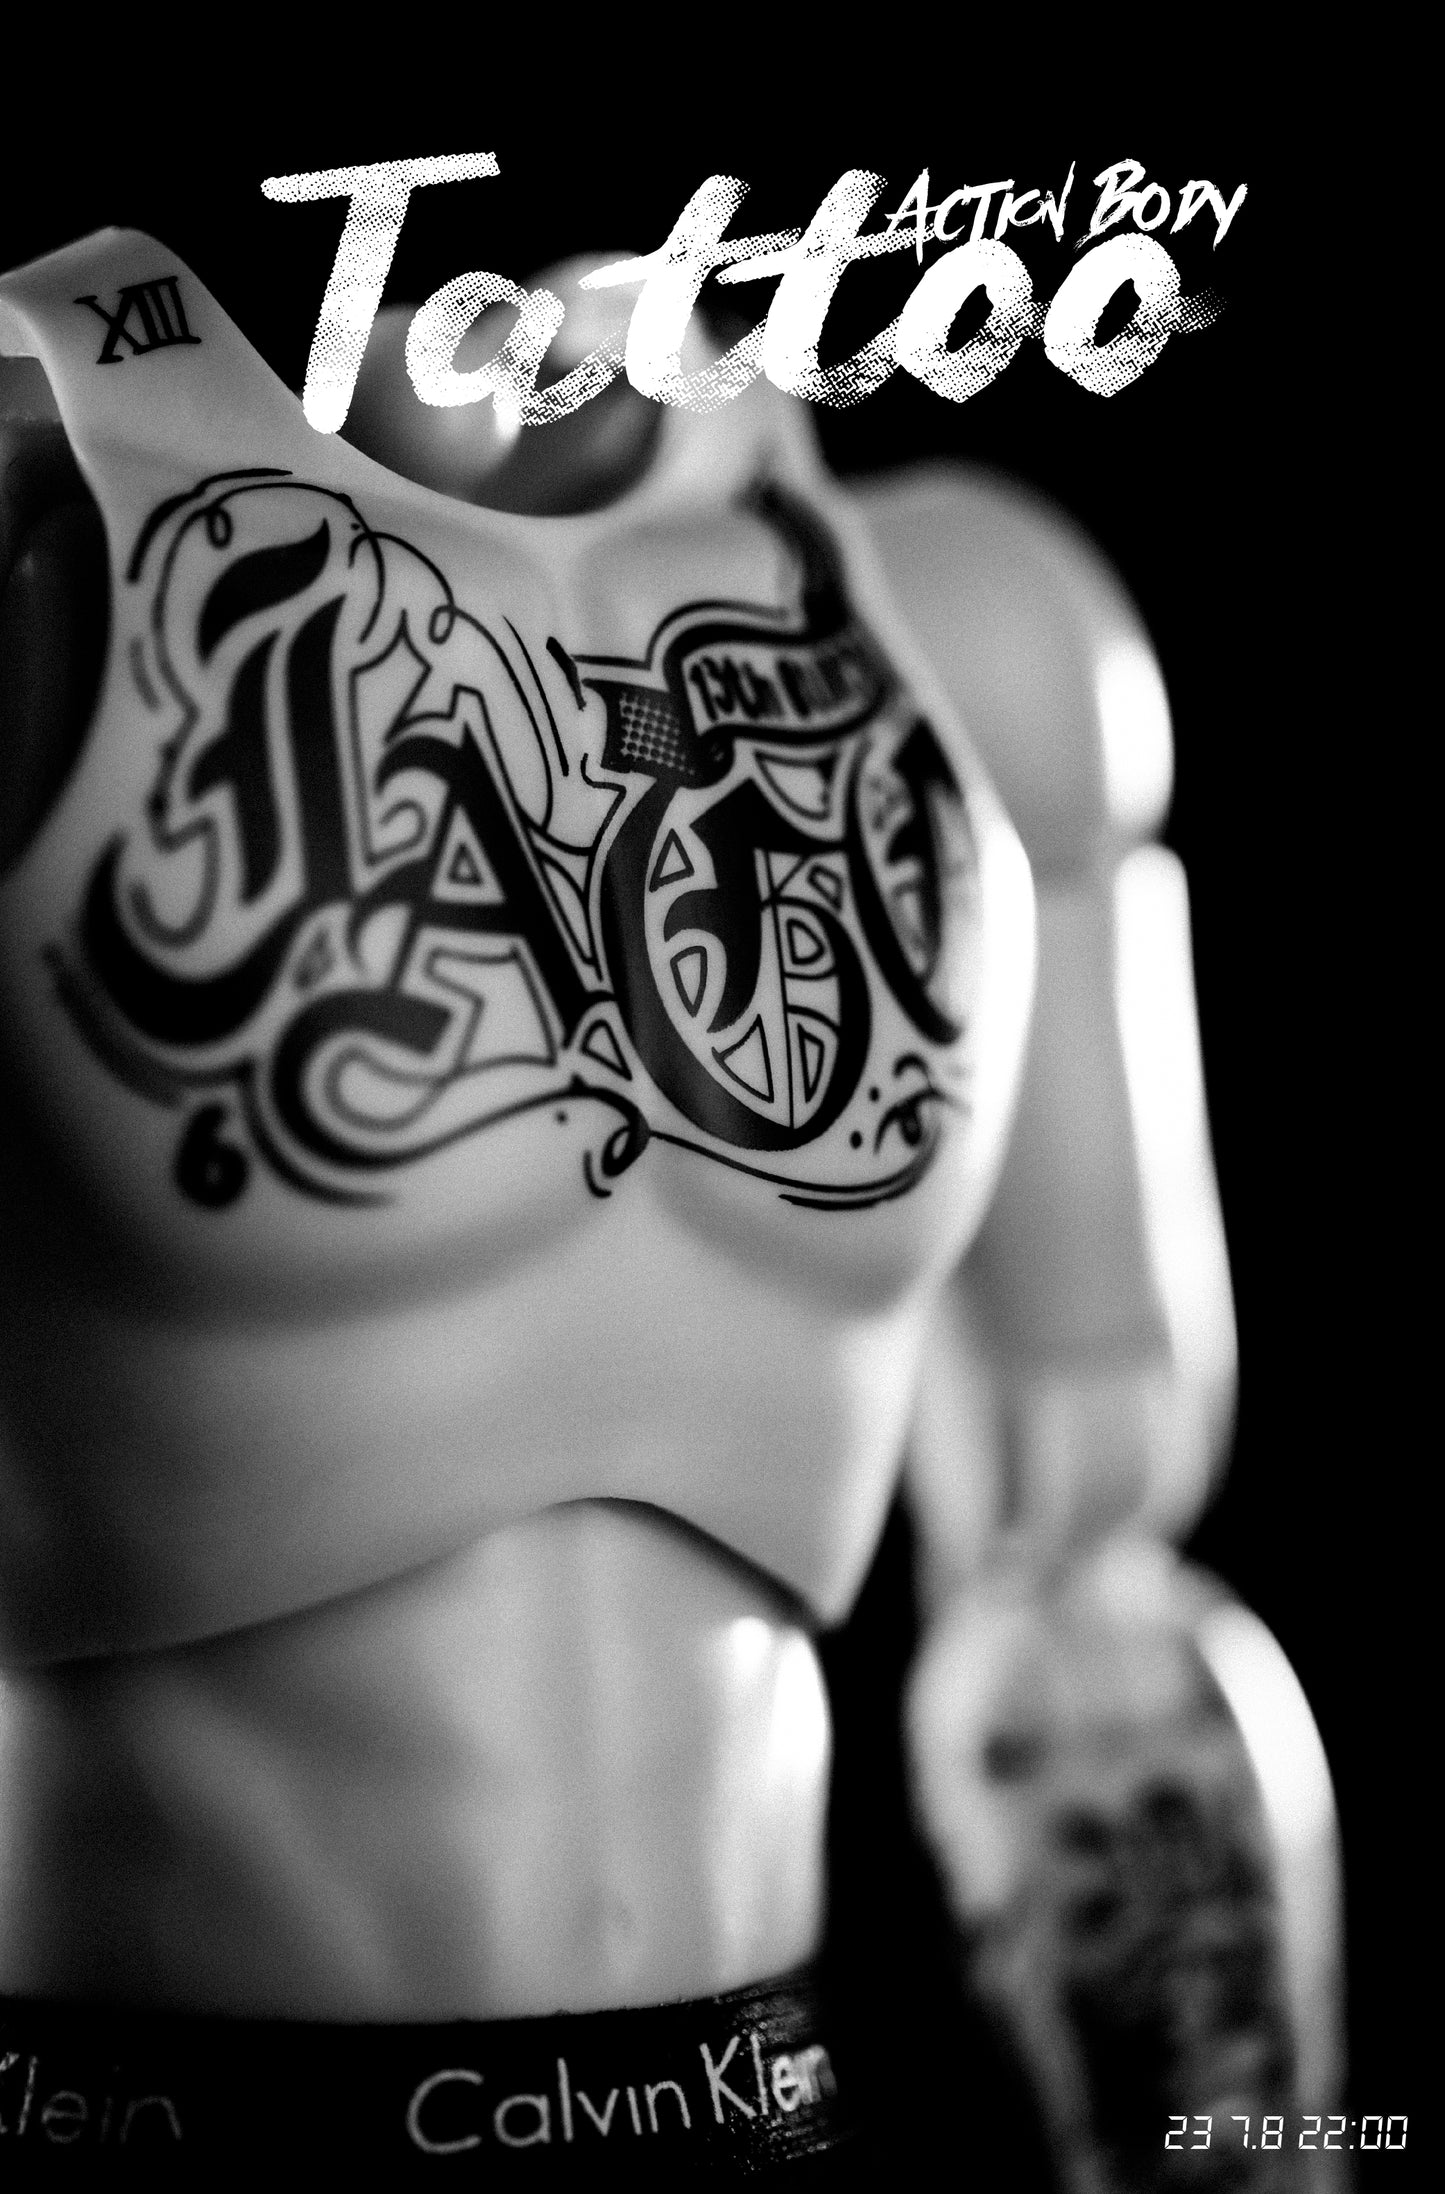 1/6 12inch TATTOO Action Body